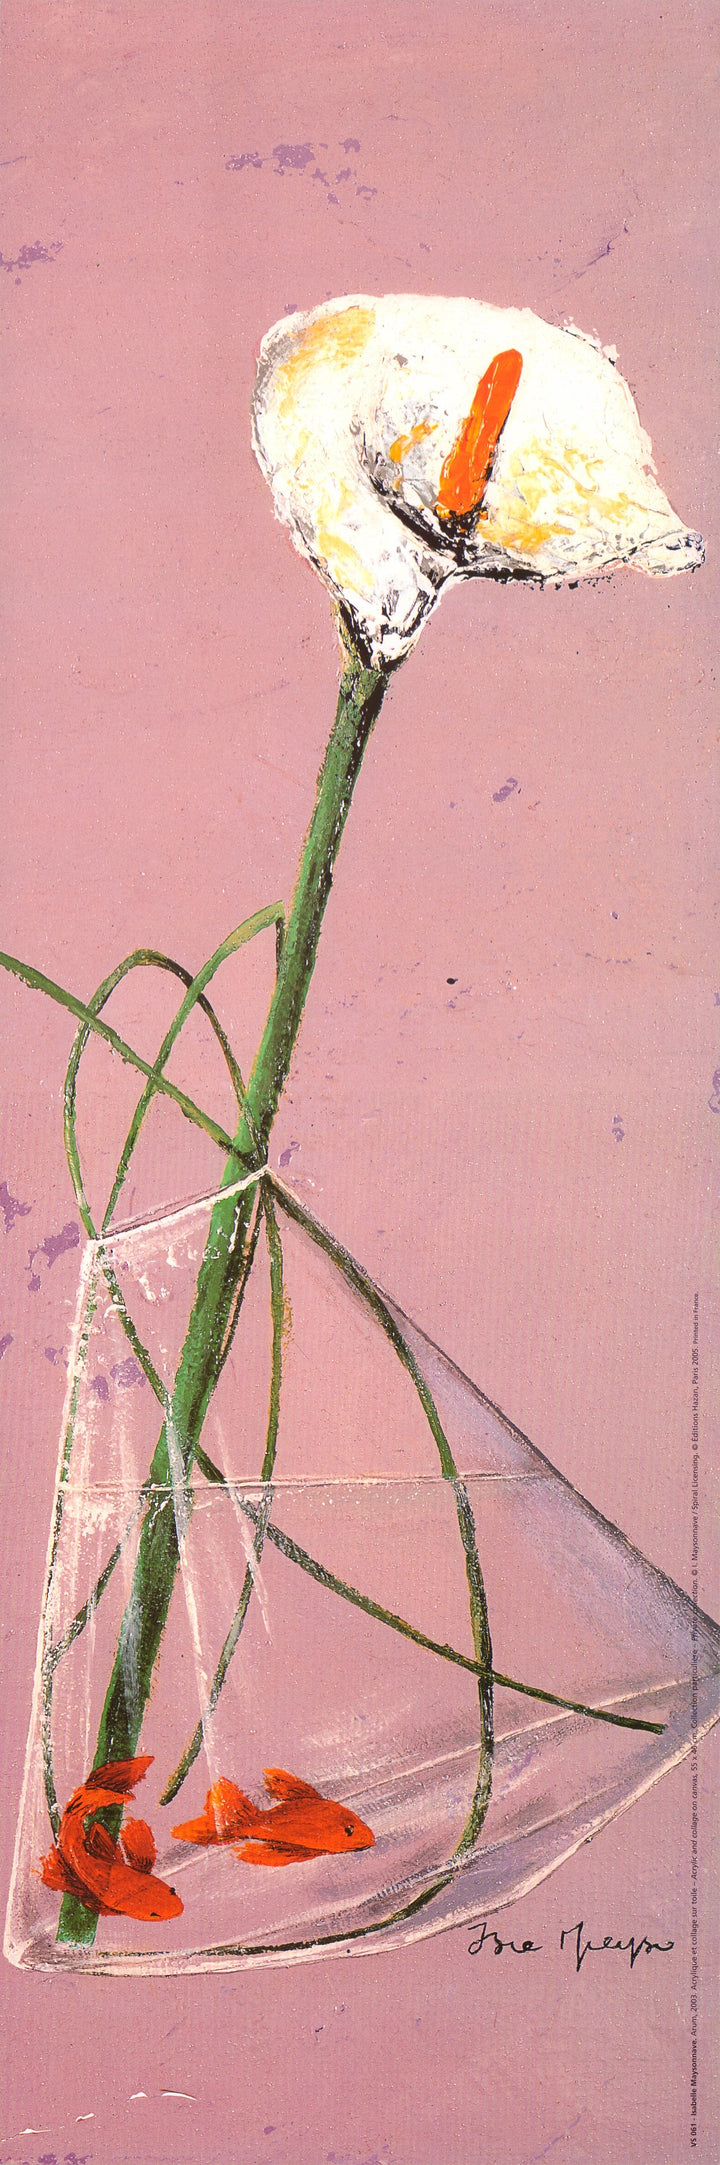 Arum, 2003 by Isabelle Maysonnave - 8 X 24 Inches (Art Print)